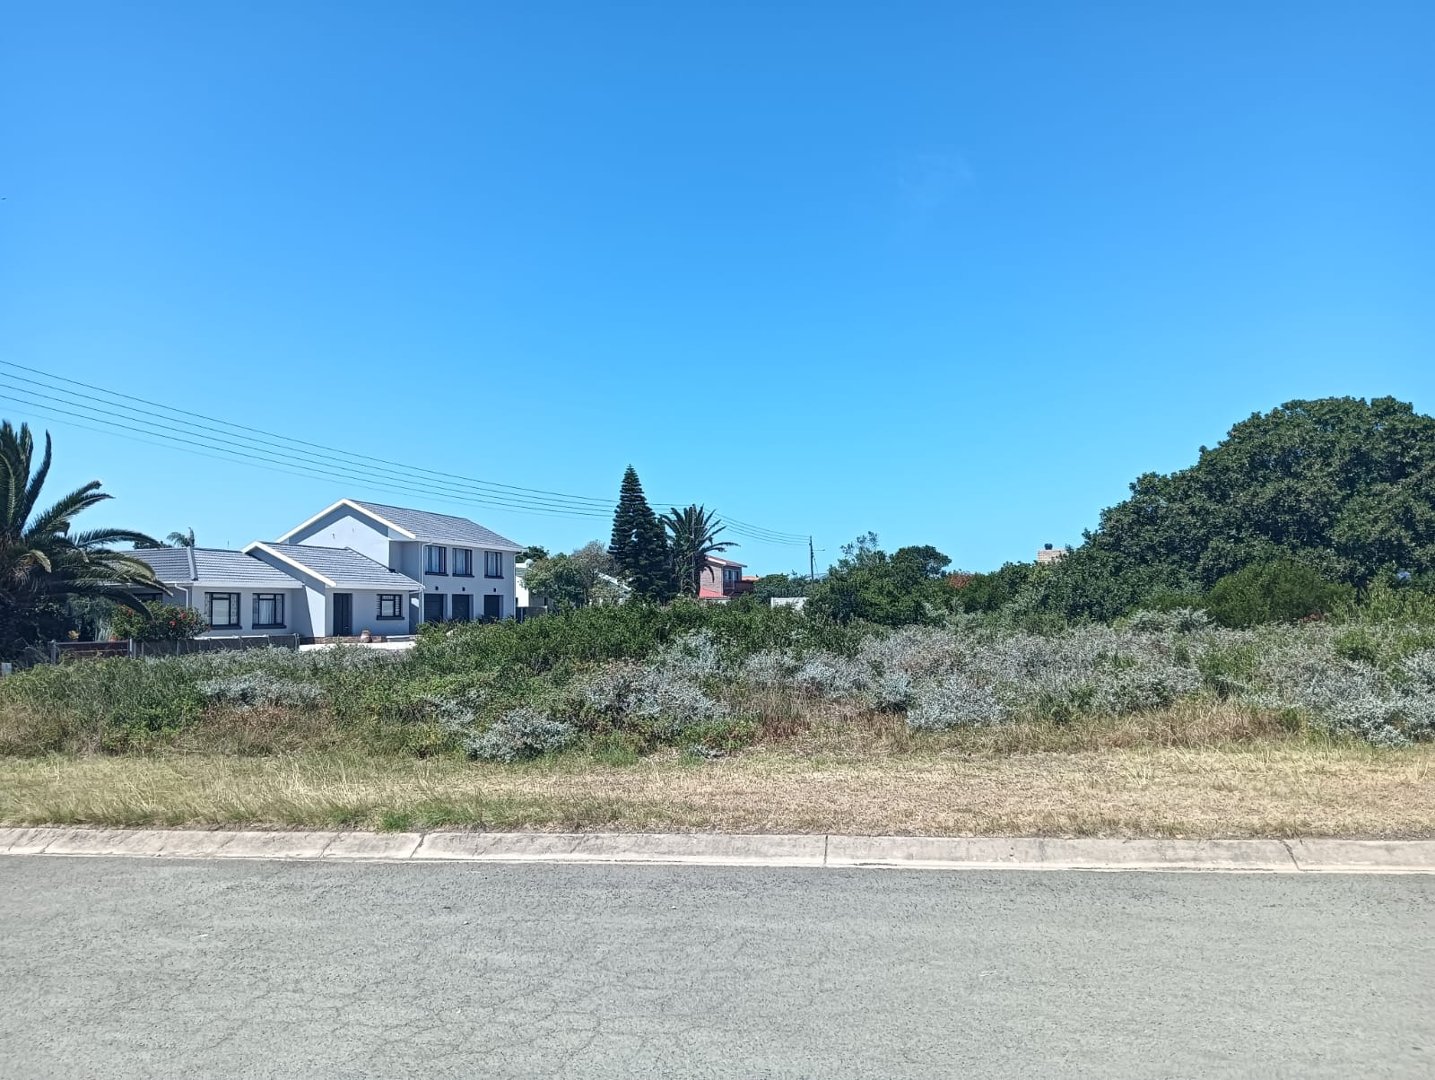  Bedroom Property for Sale in Fraaiuitsig Western Cape